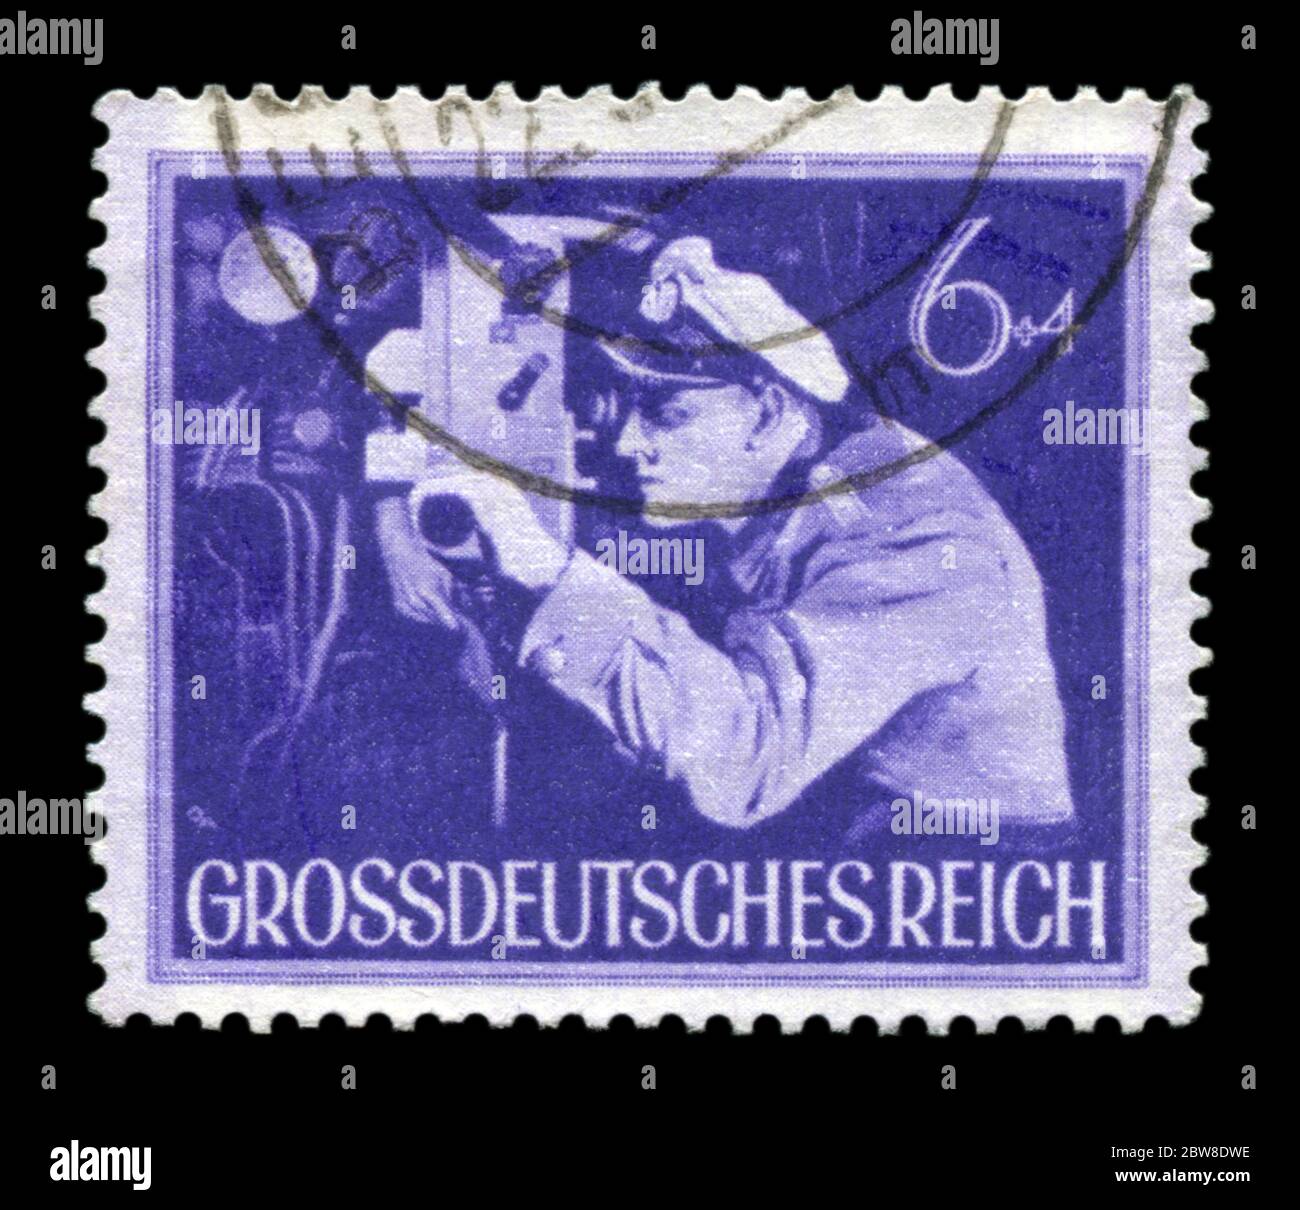 German historical stamp: The commander of the submarine at the periscope. The Army Of The third Reich. Day of commemoration of the fallen soldiers, 44 Stock Photo